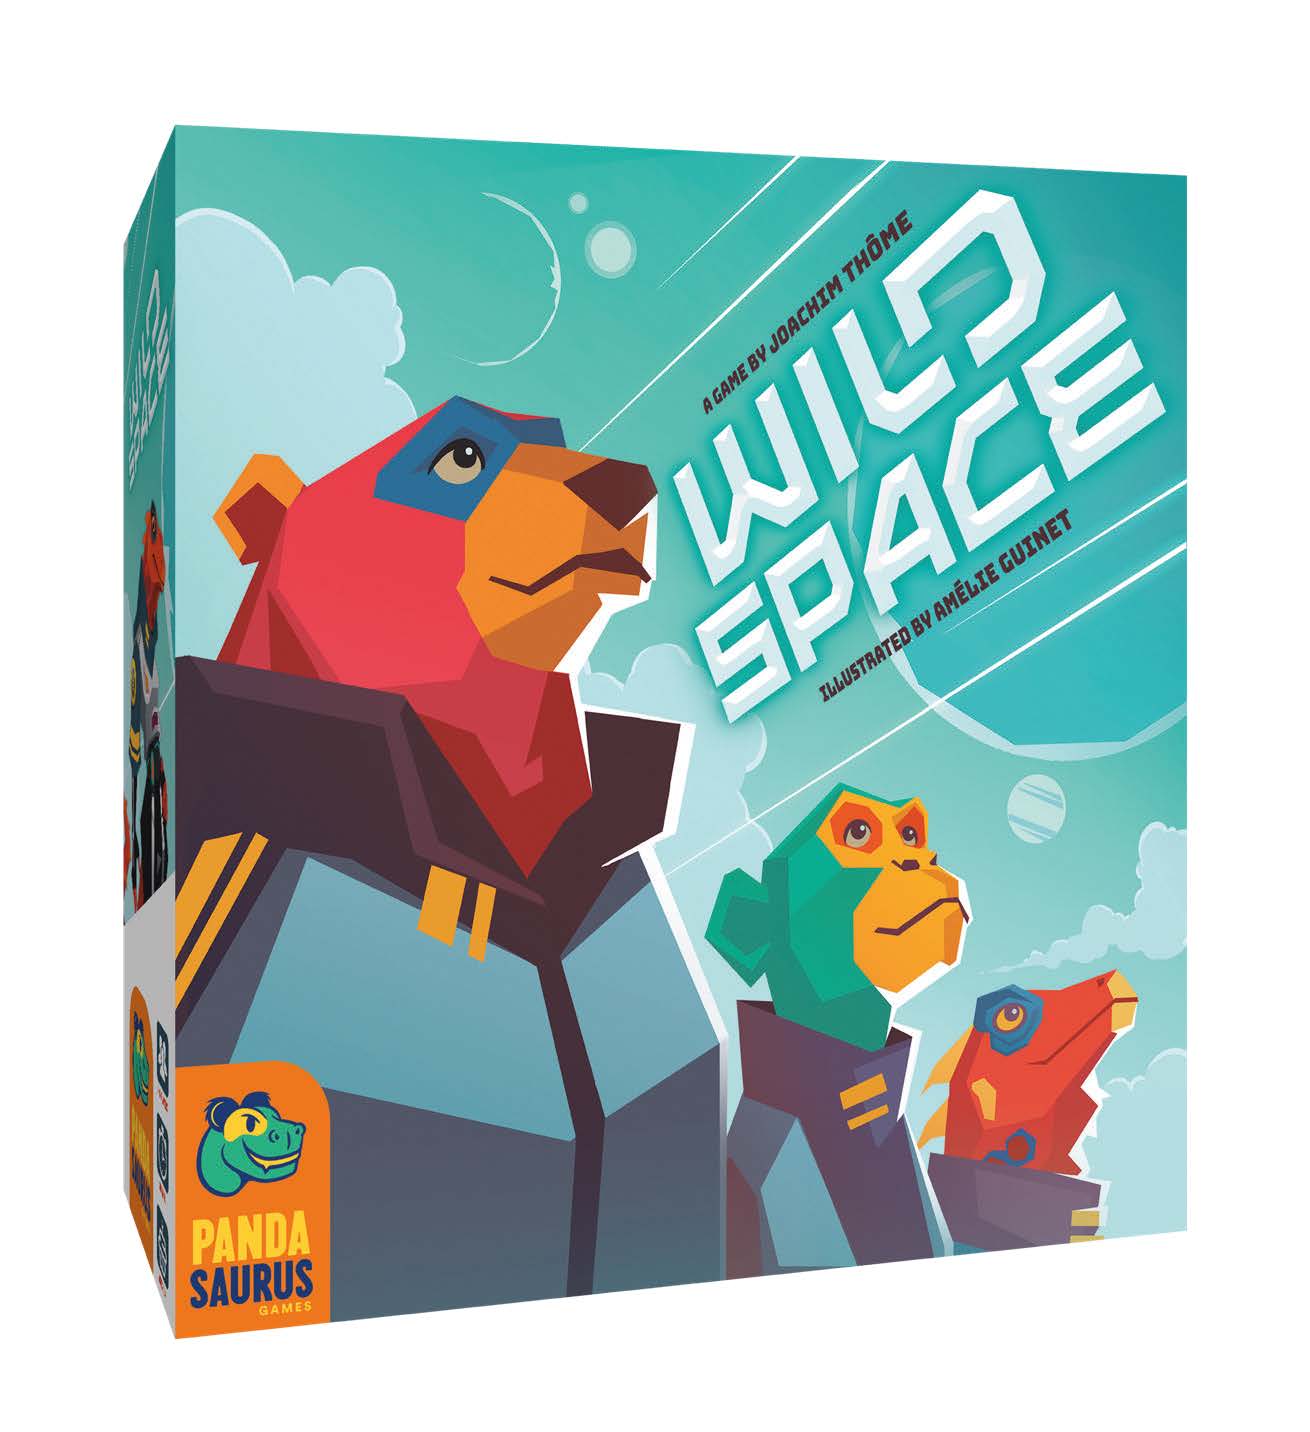 Wild Space : A Game By Joachim Thome